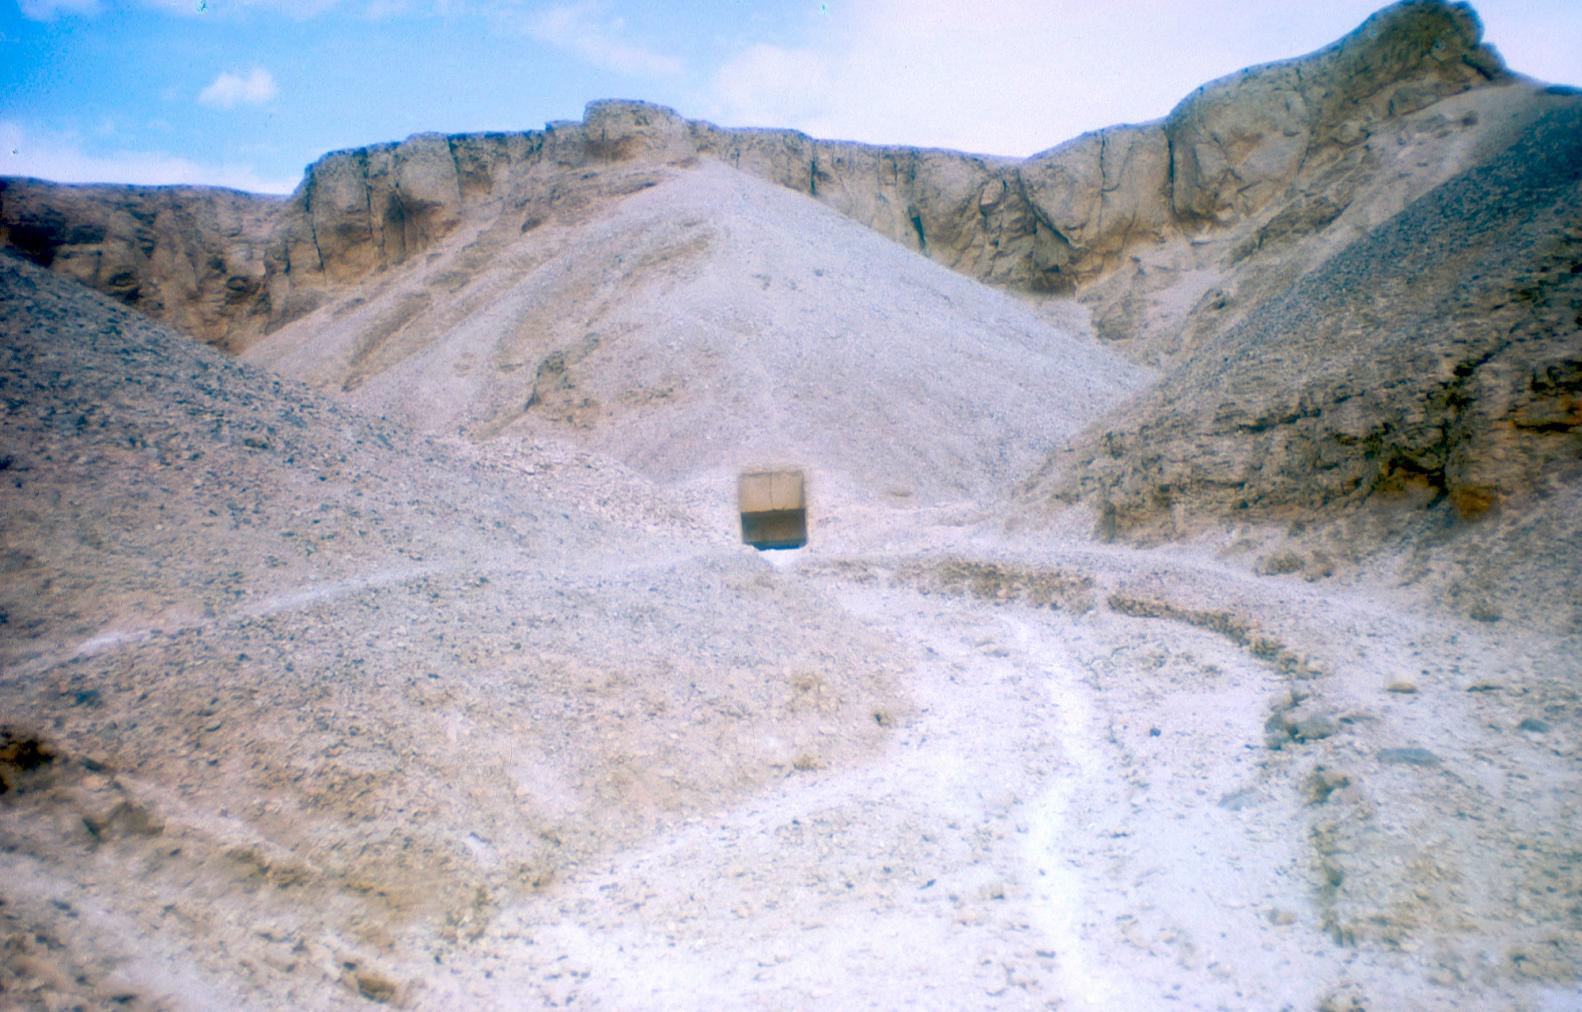 Approach to a tomb.